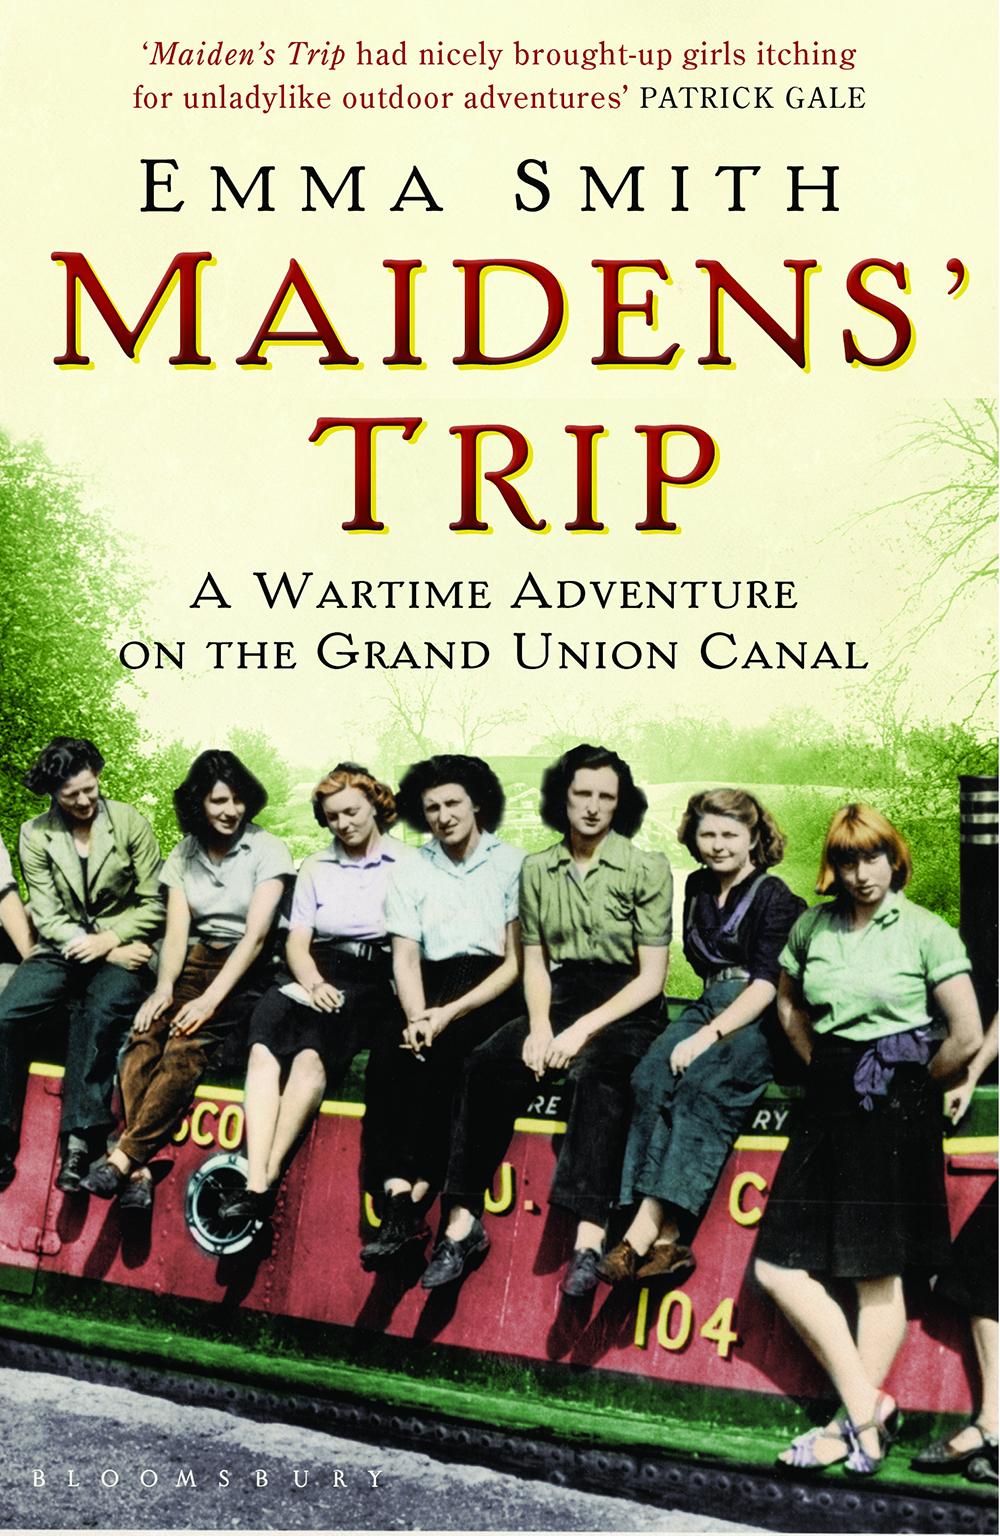 Smith’s debut ‘Maidens’ Trip’, published in 1948, was a big success, winning the John Llewellyn Rhys Prize